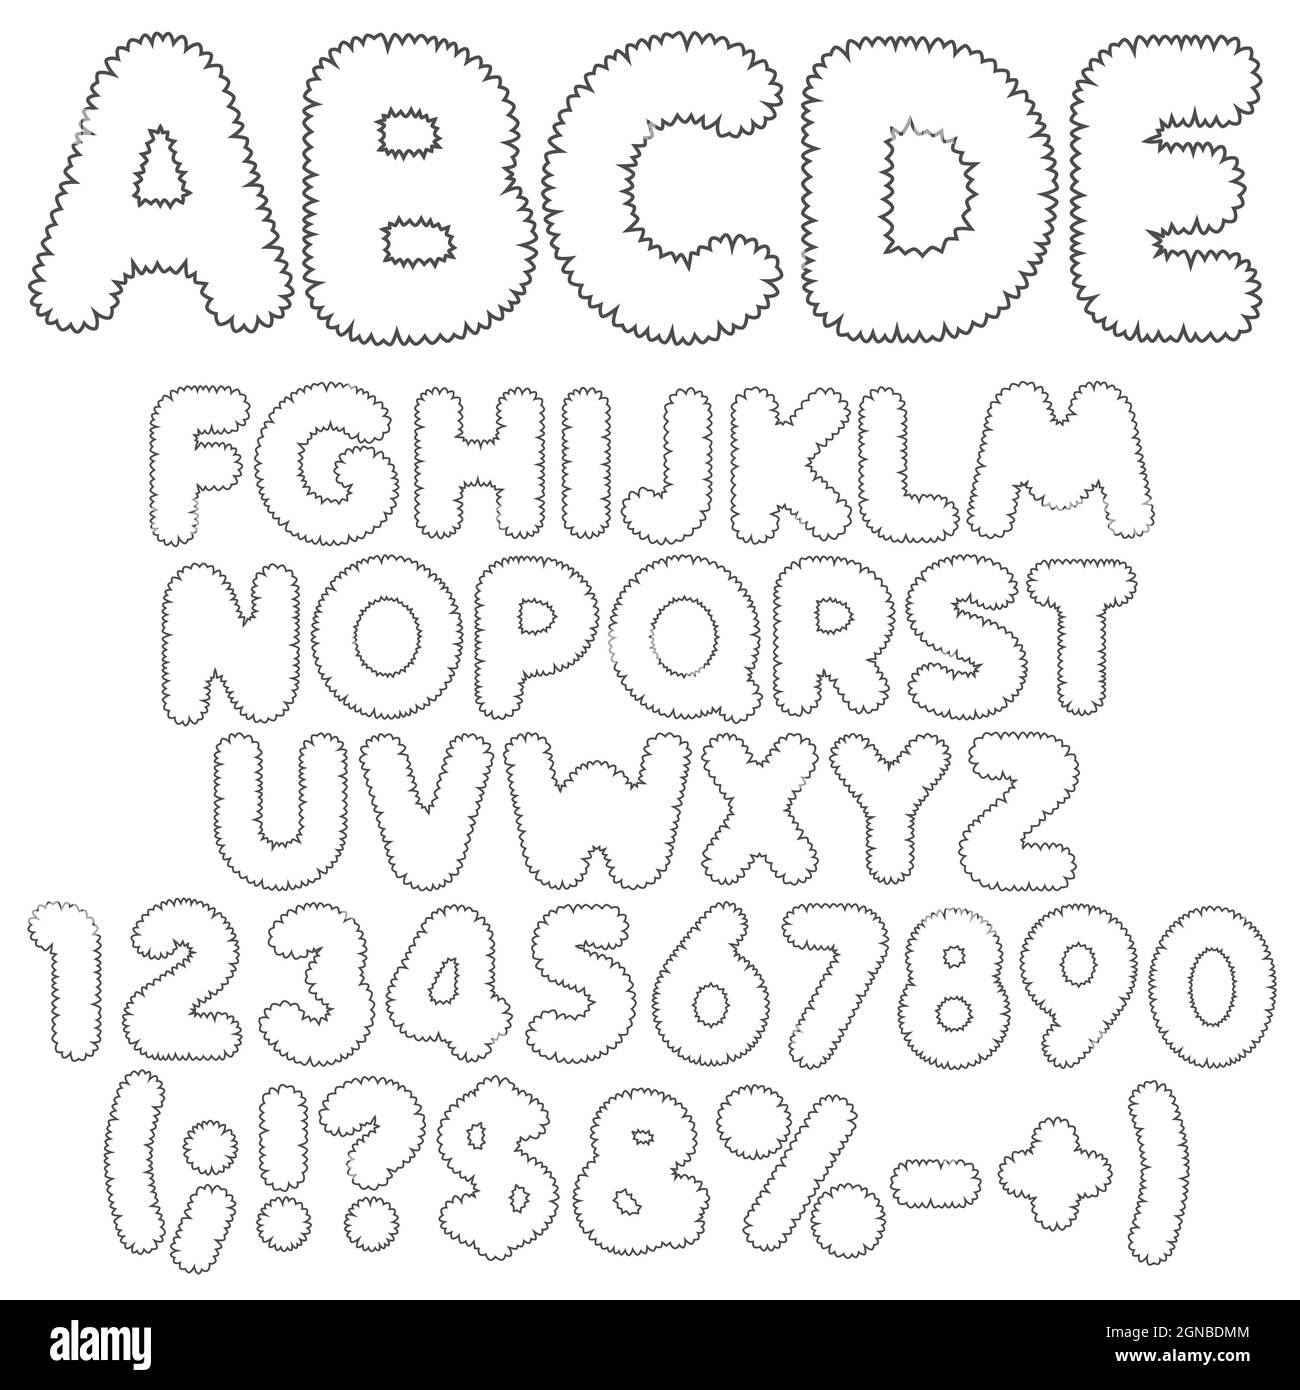 Shaggy alphabet, letters, numbers and signs. Isolated vector objects on white background. Stock Vector